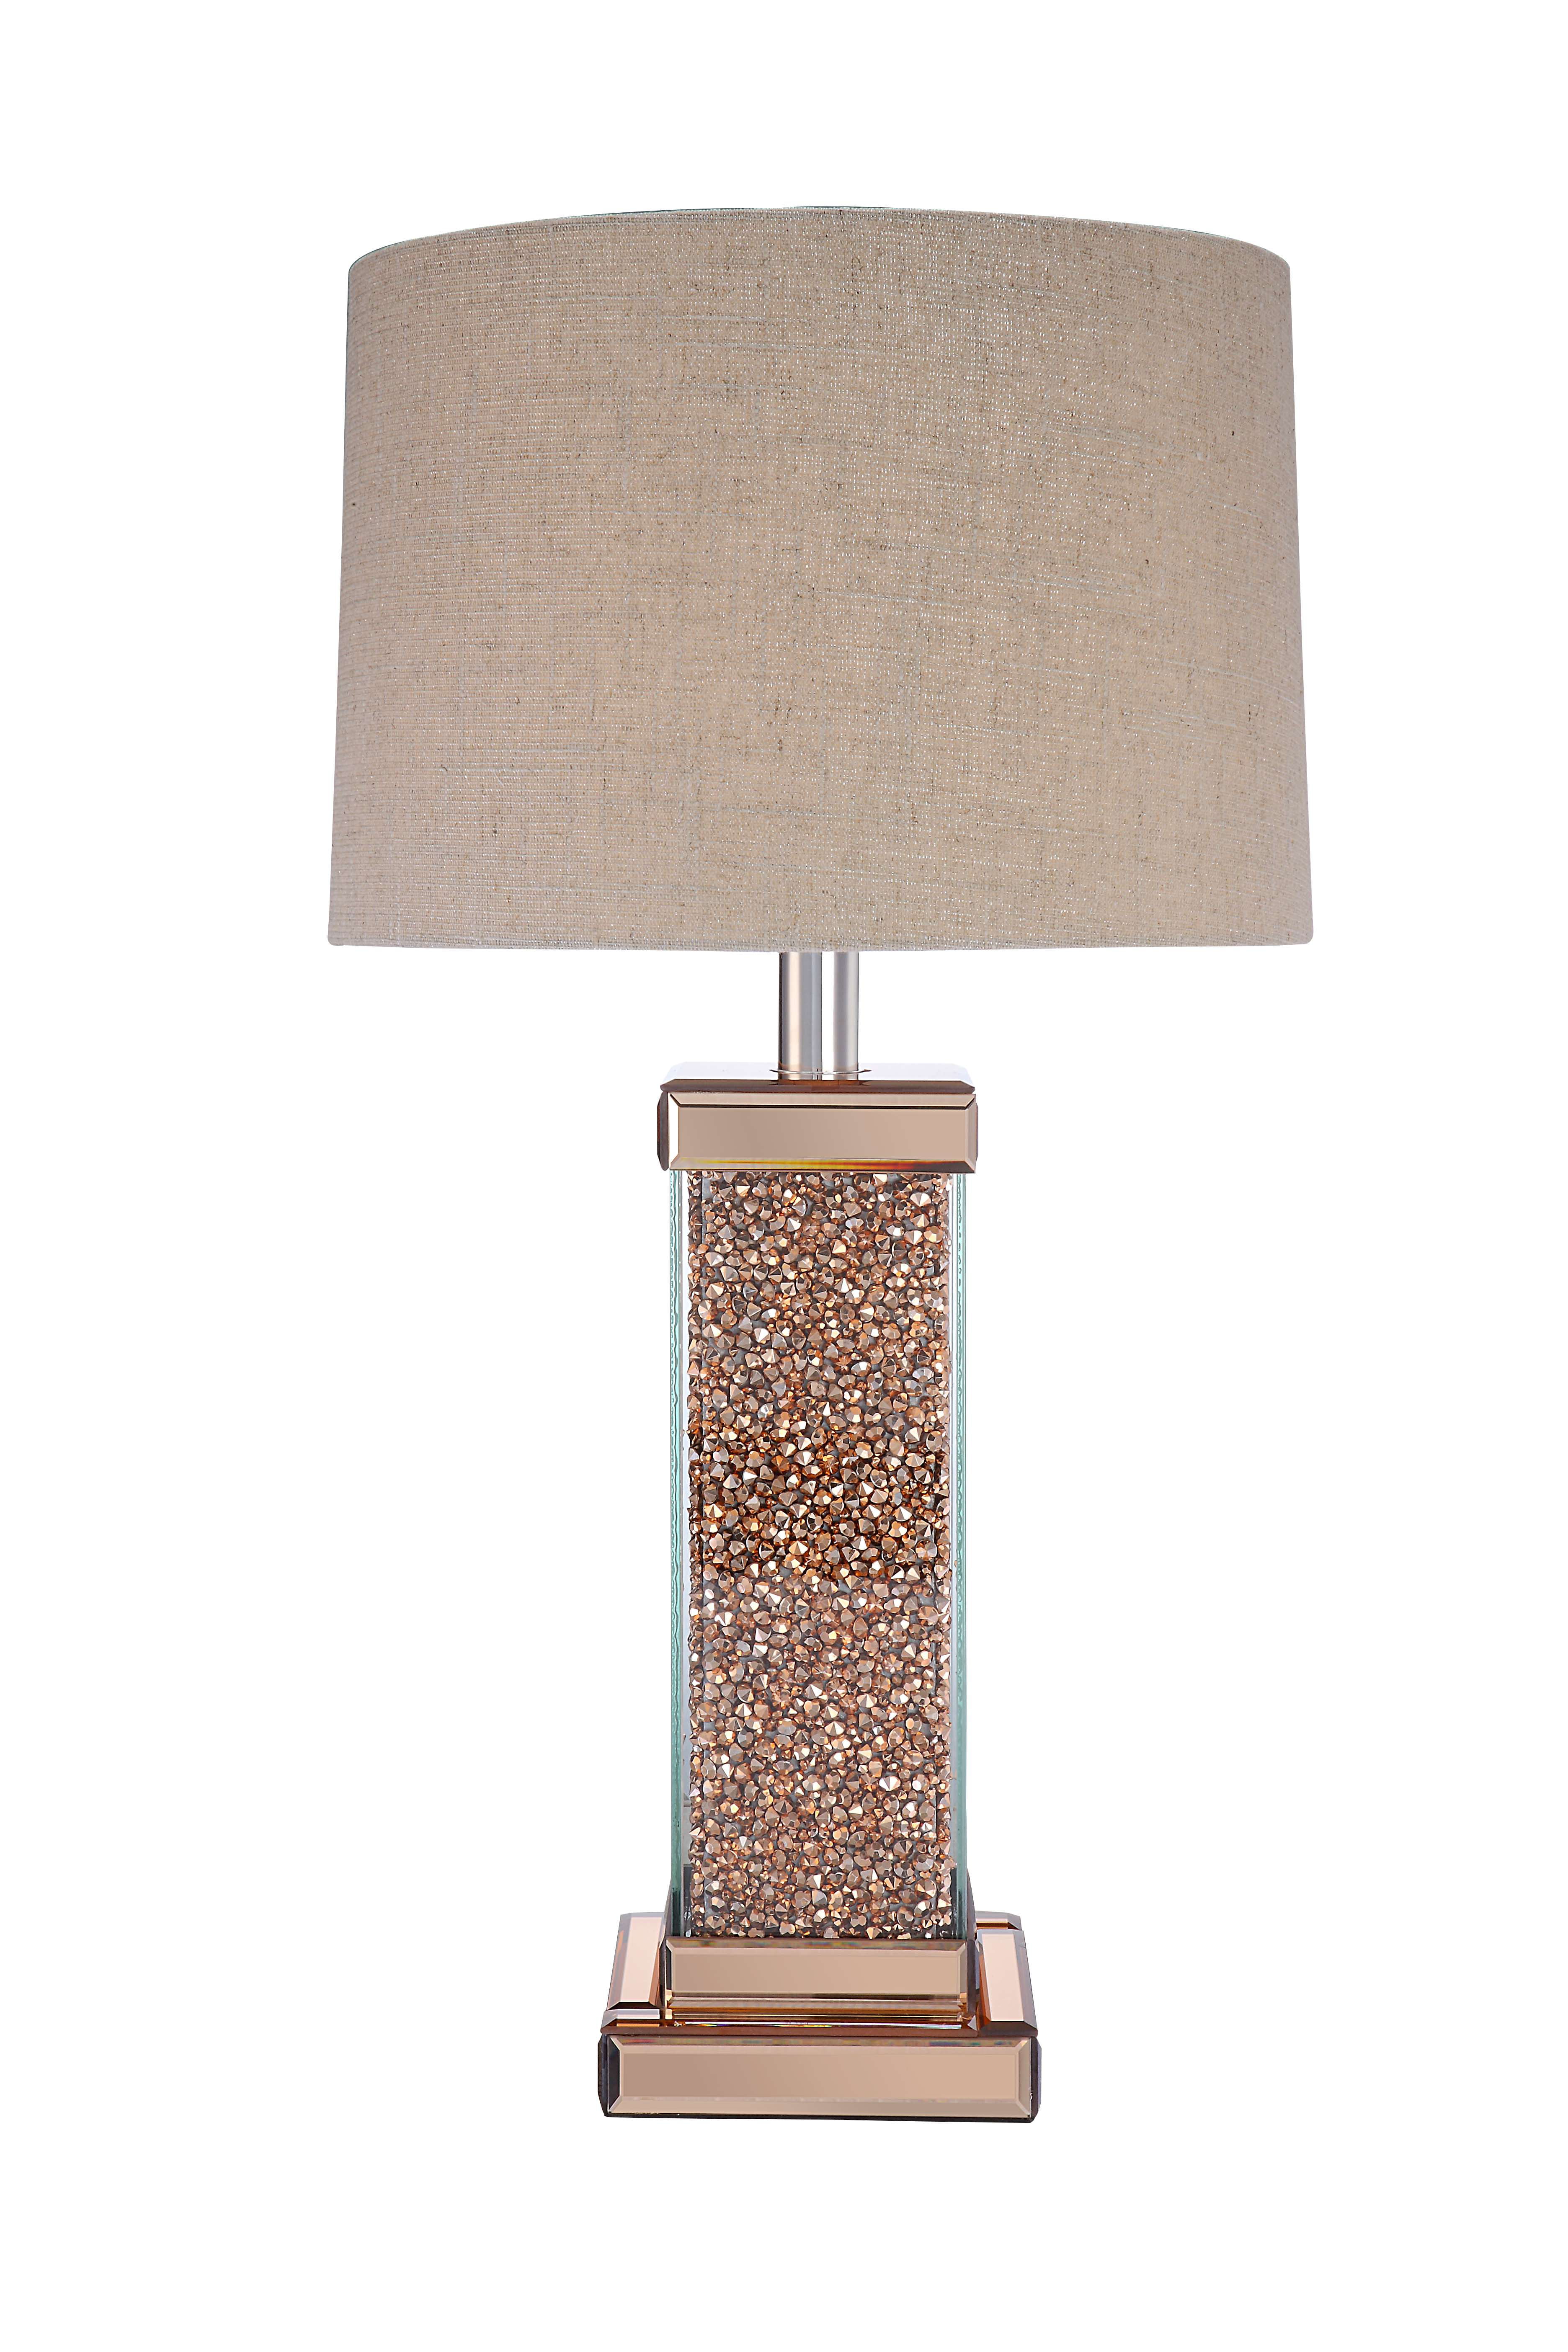 rose gold table lamp shade